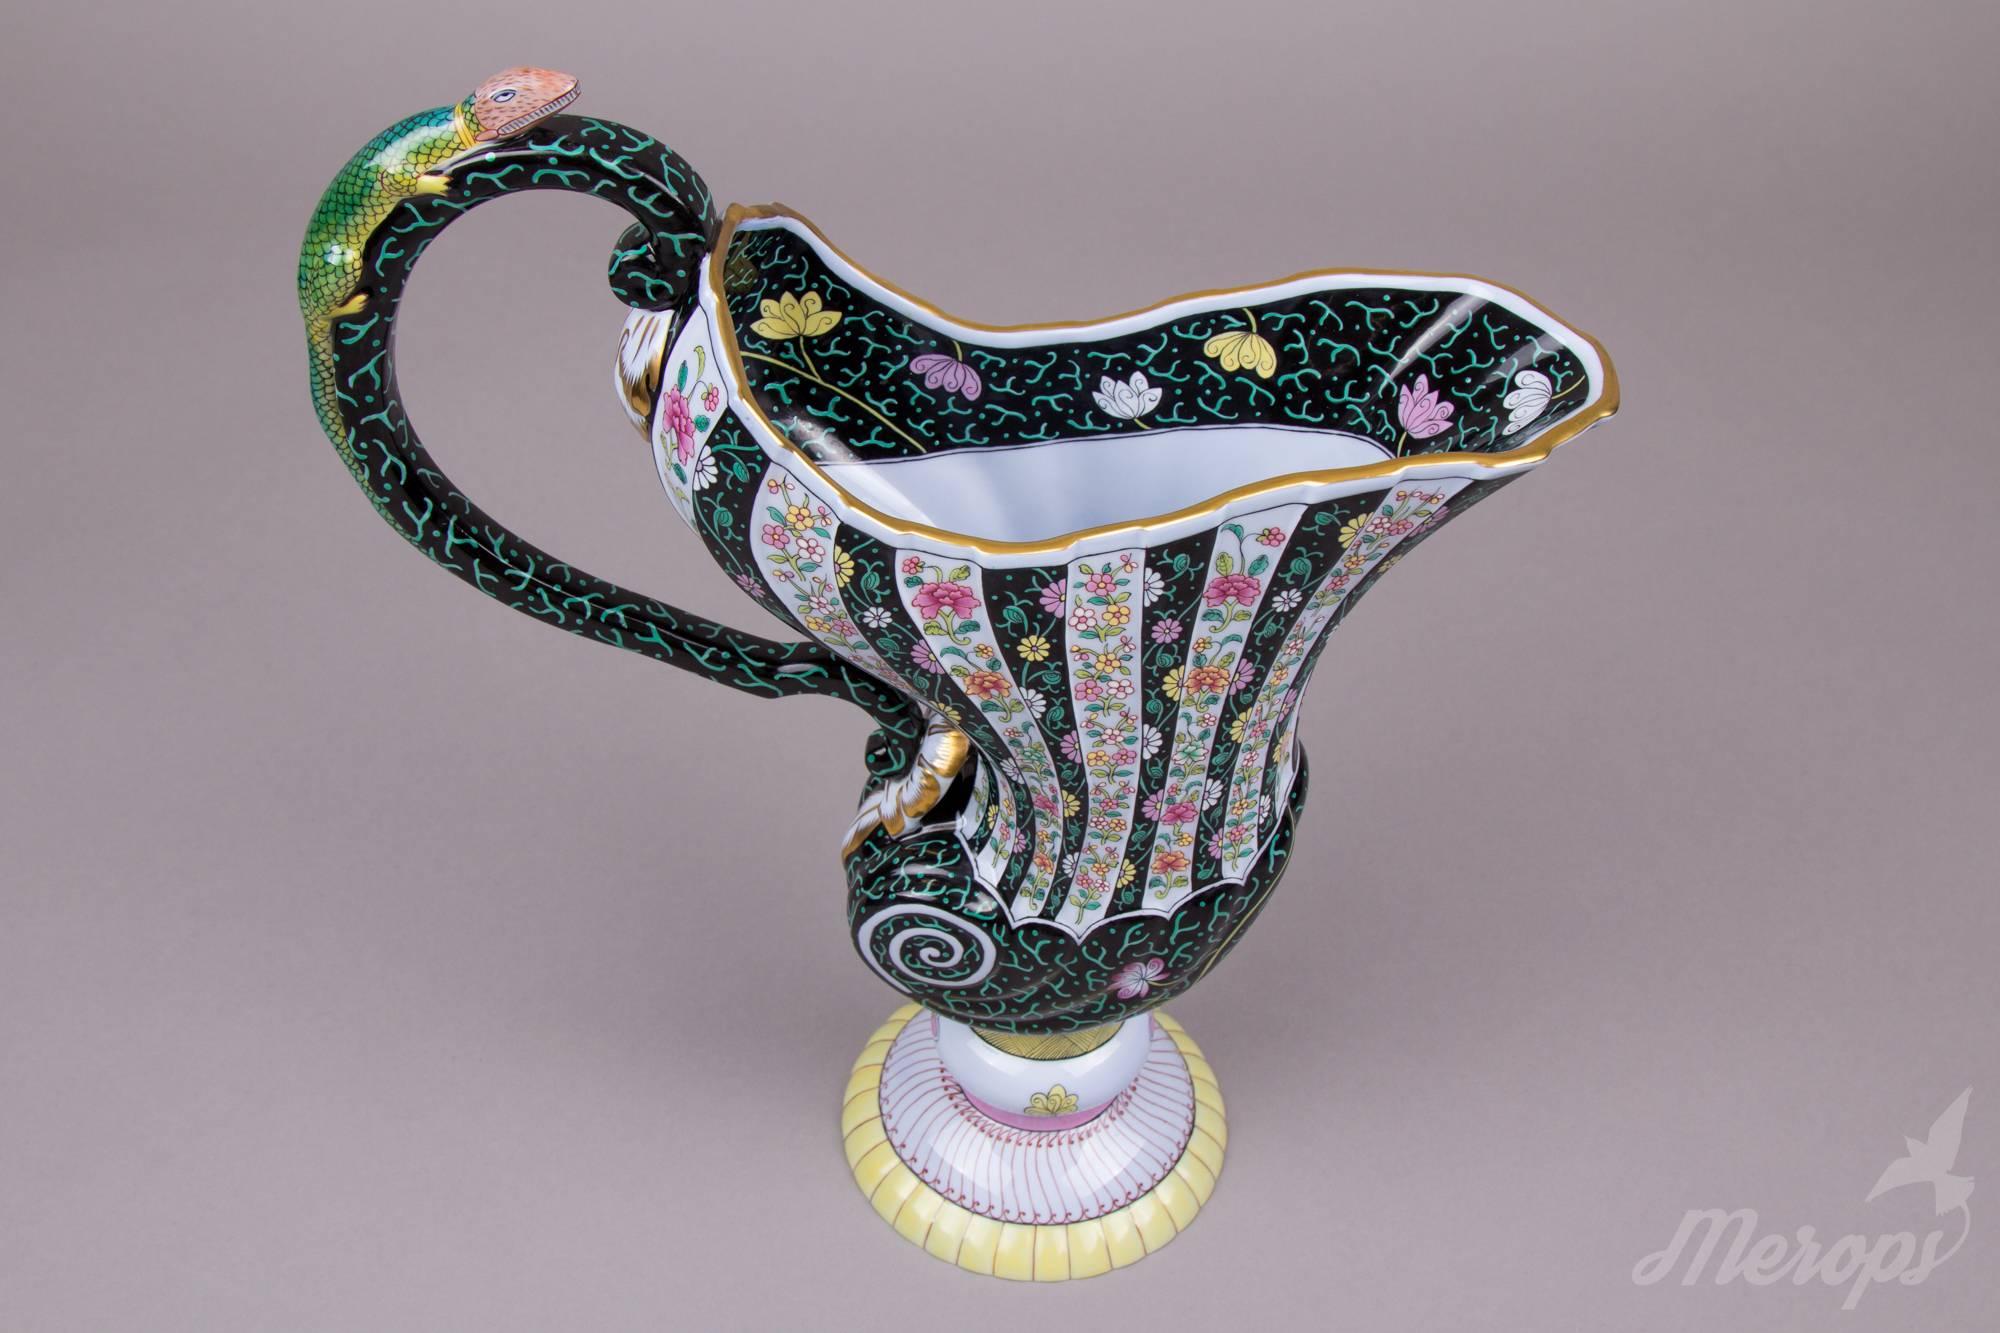 Herend Siang Noir Black Dynasty Water Pitcher with Lizard Handle, circa 1960 For Sale 1